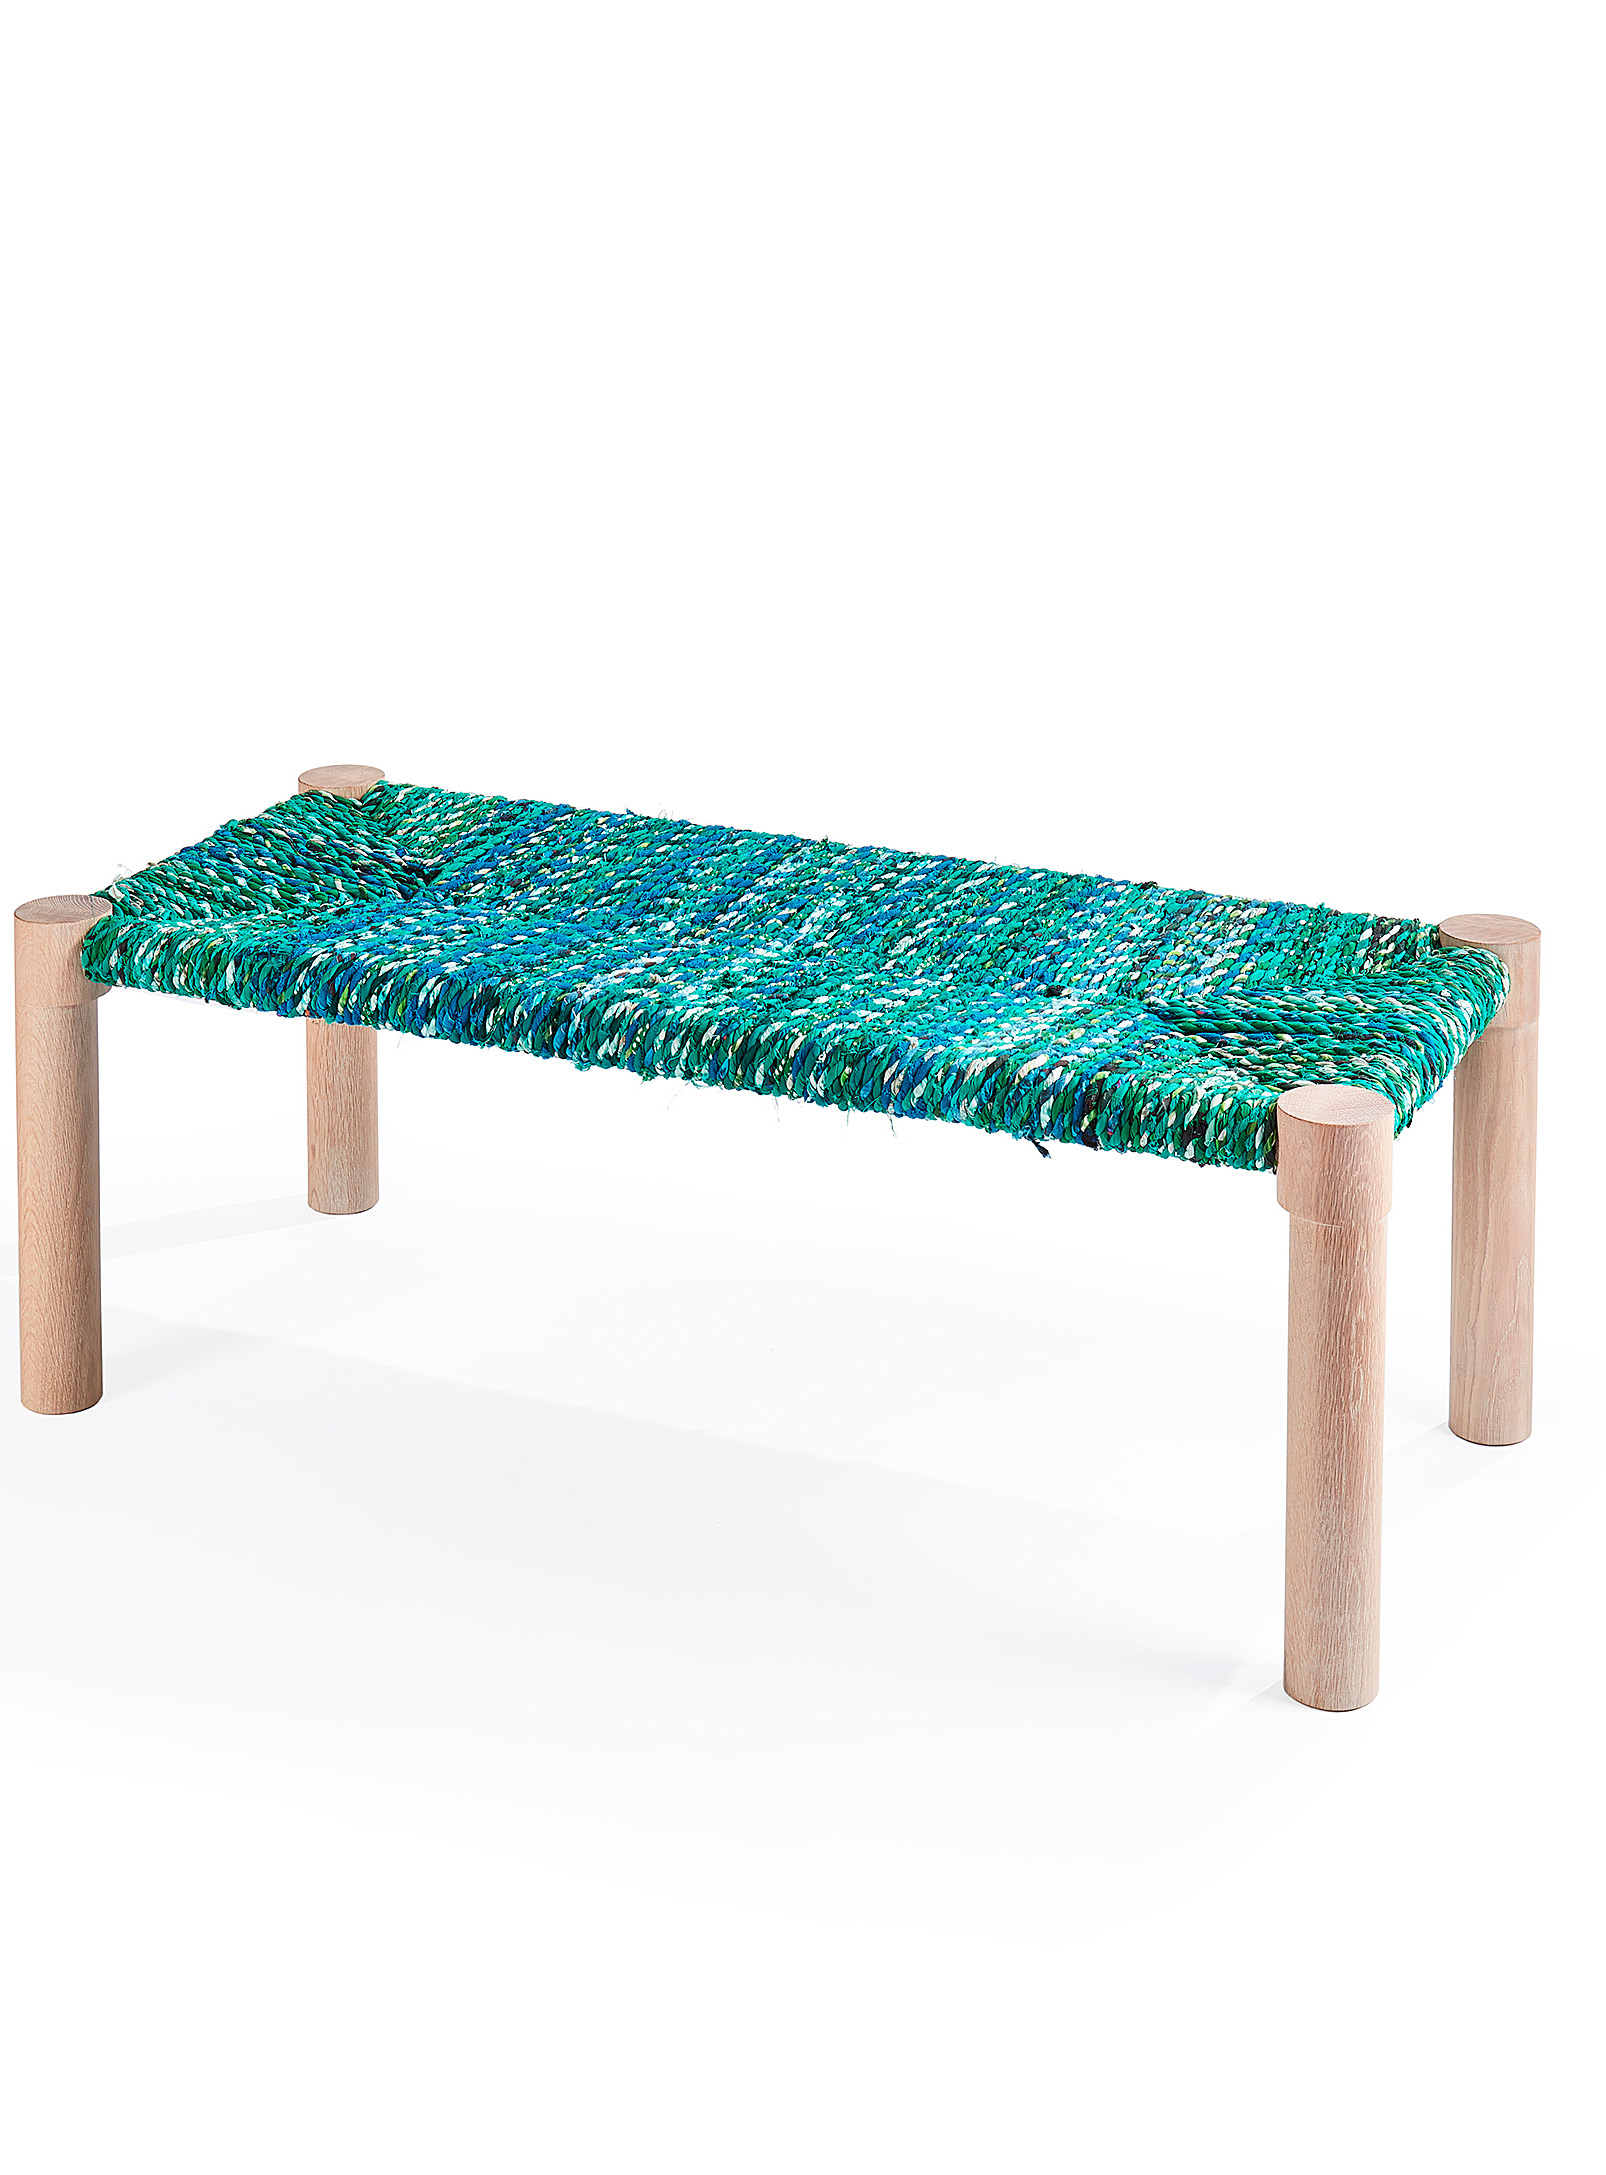 Coolican & Company Calla Bench In Green